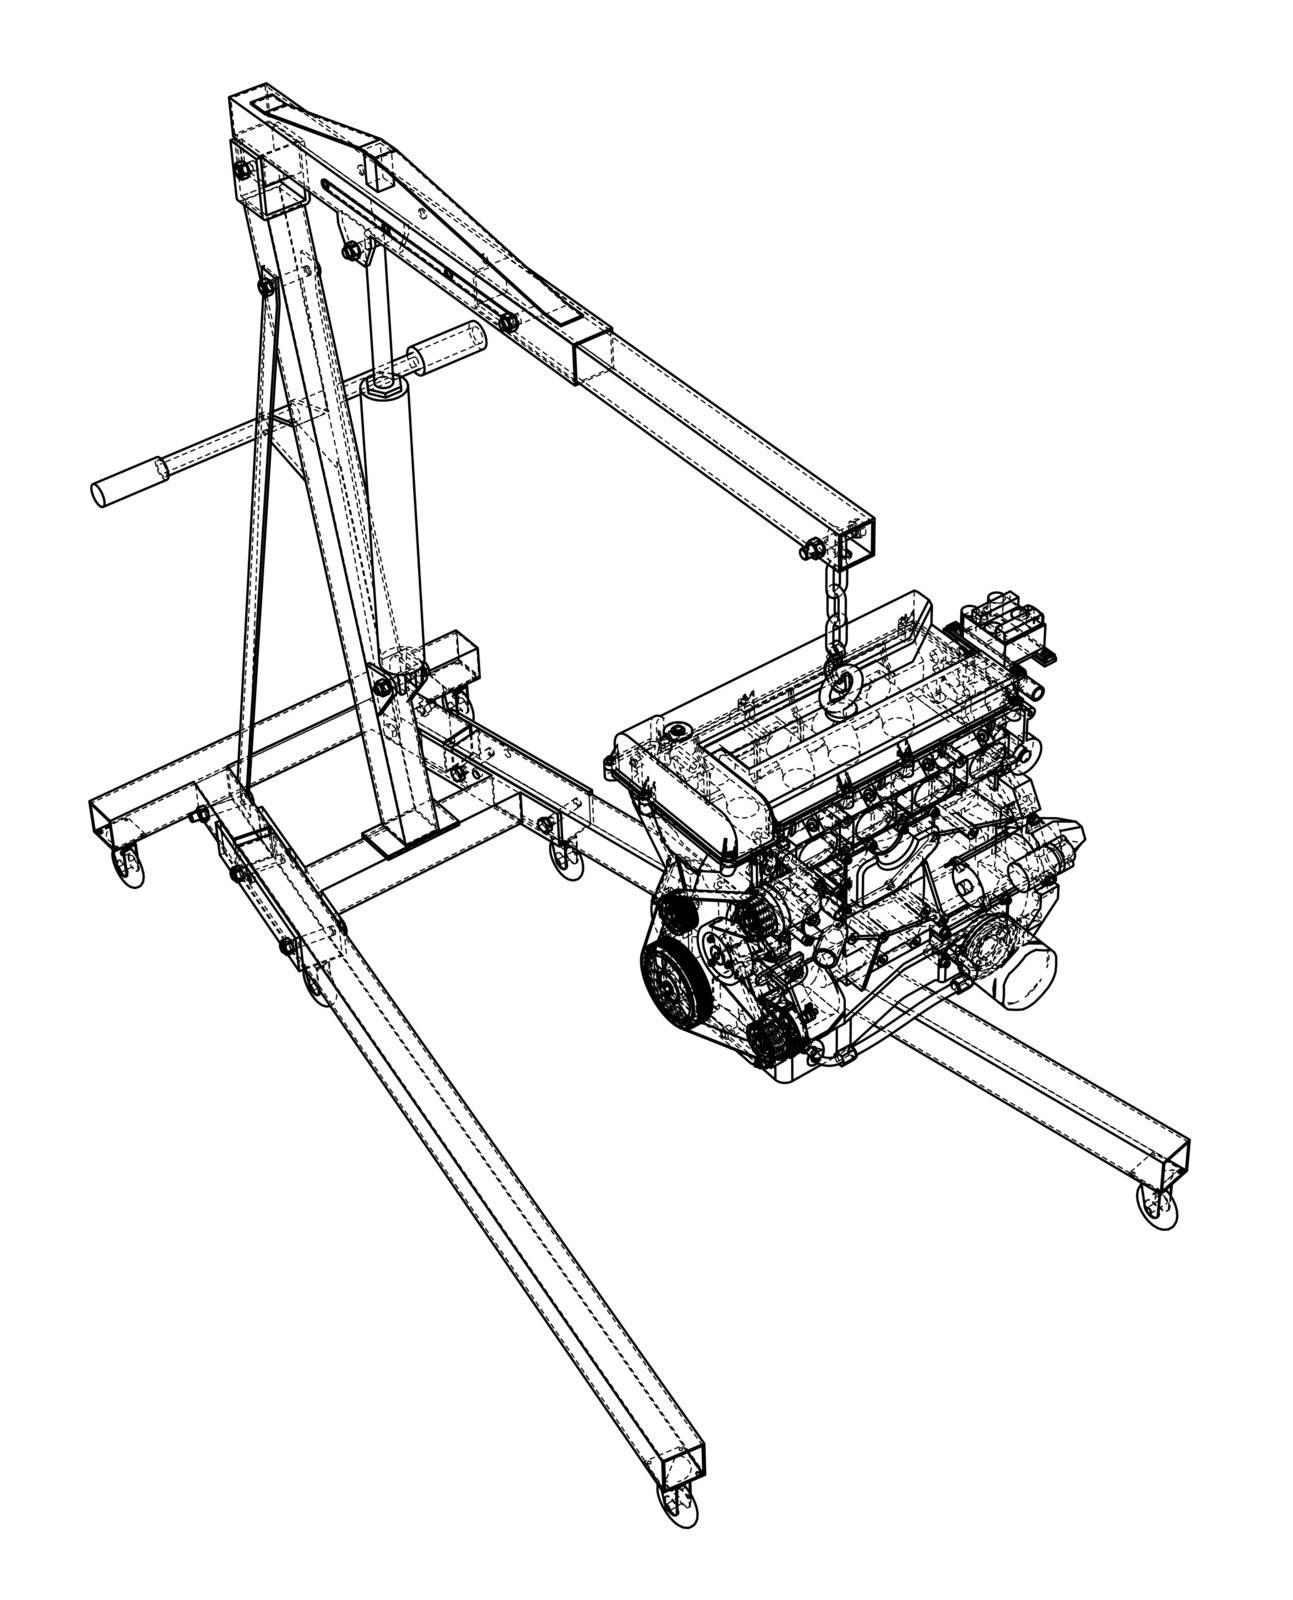 Engine hoist with engine outline by cherezoff